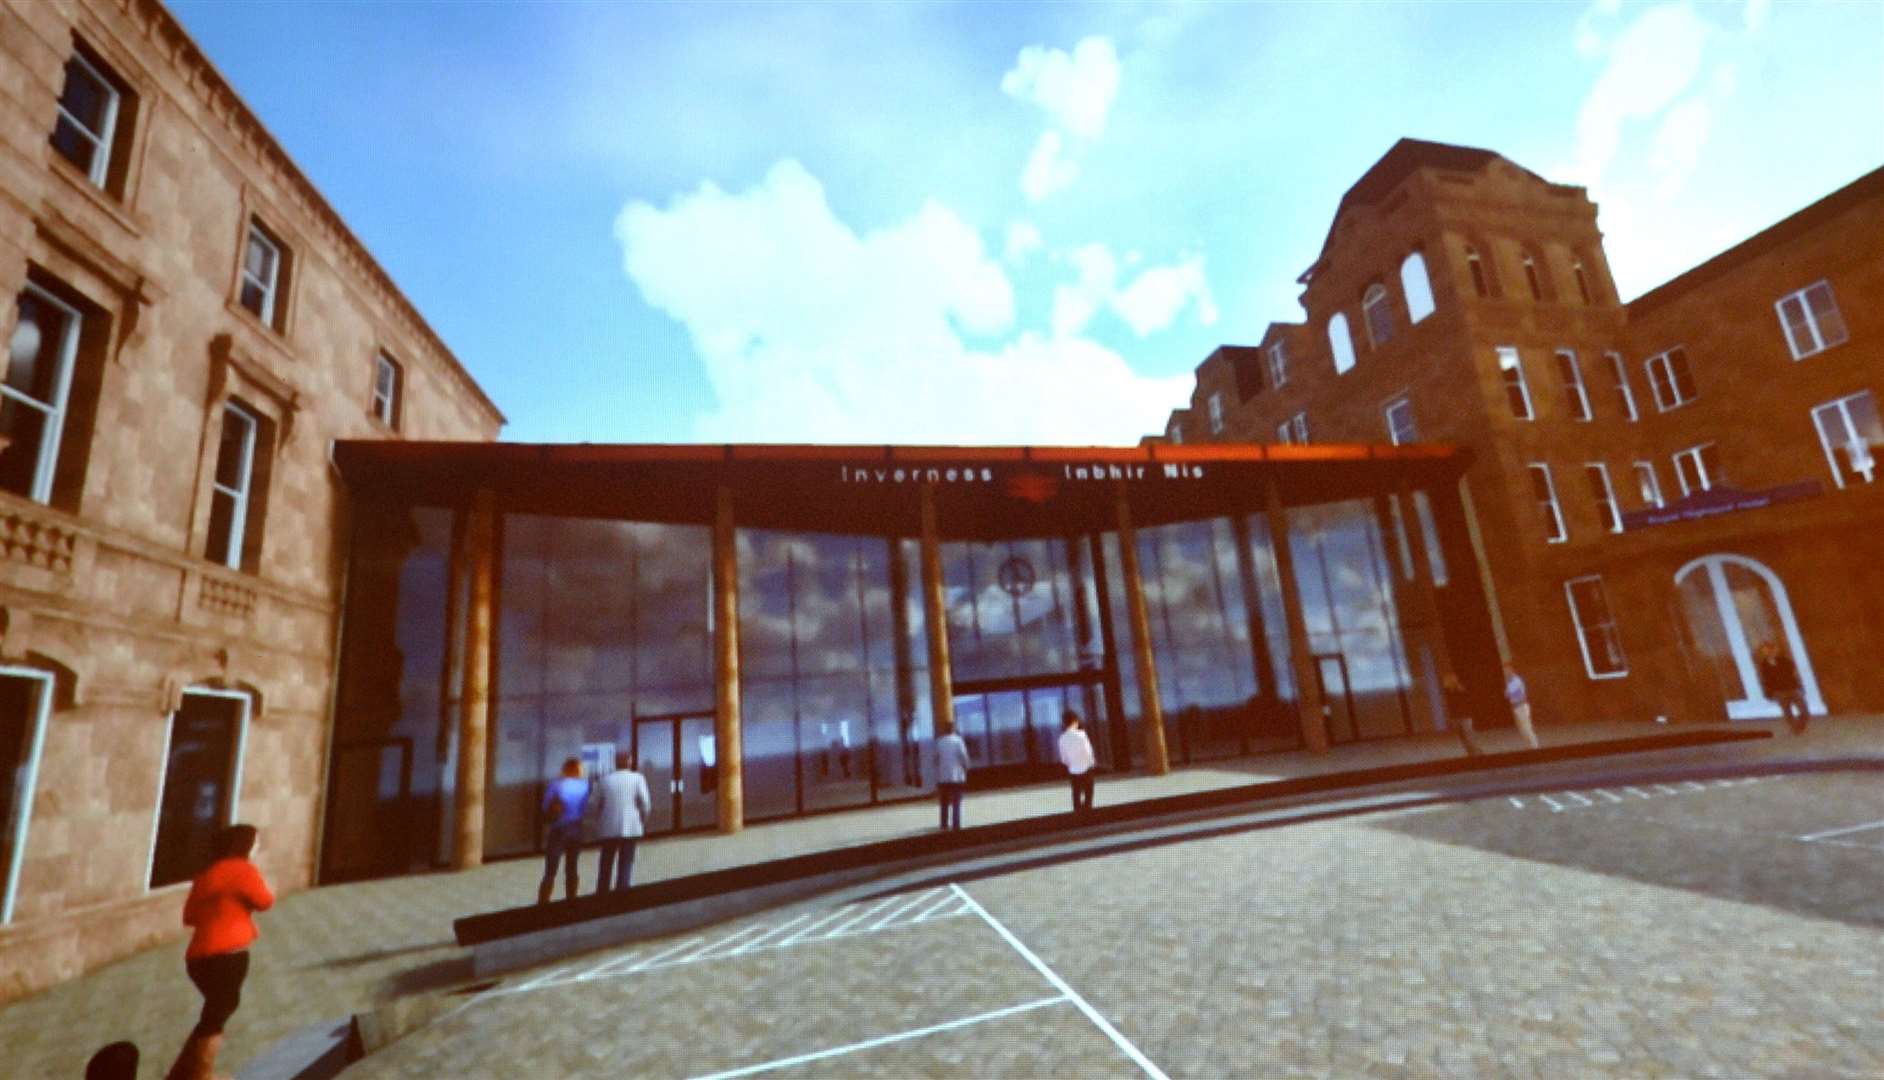 CGI of how what the Station Square entrance of the station could look after a planned revamp.